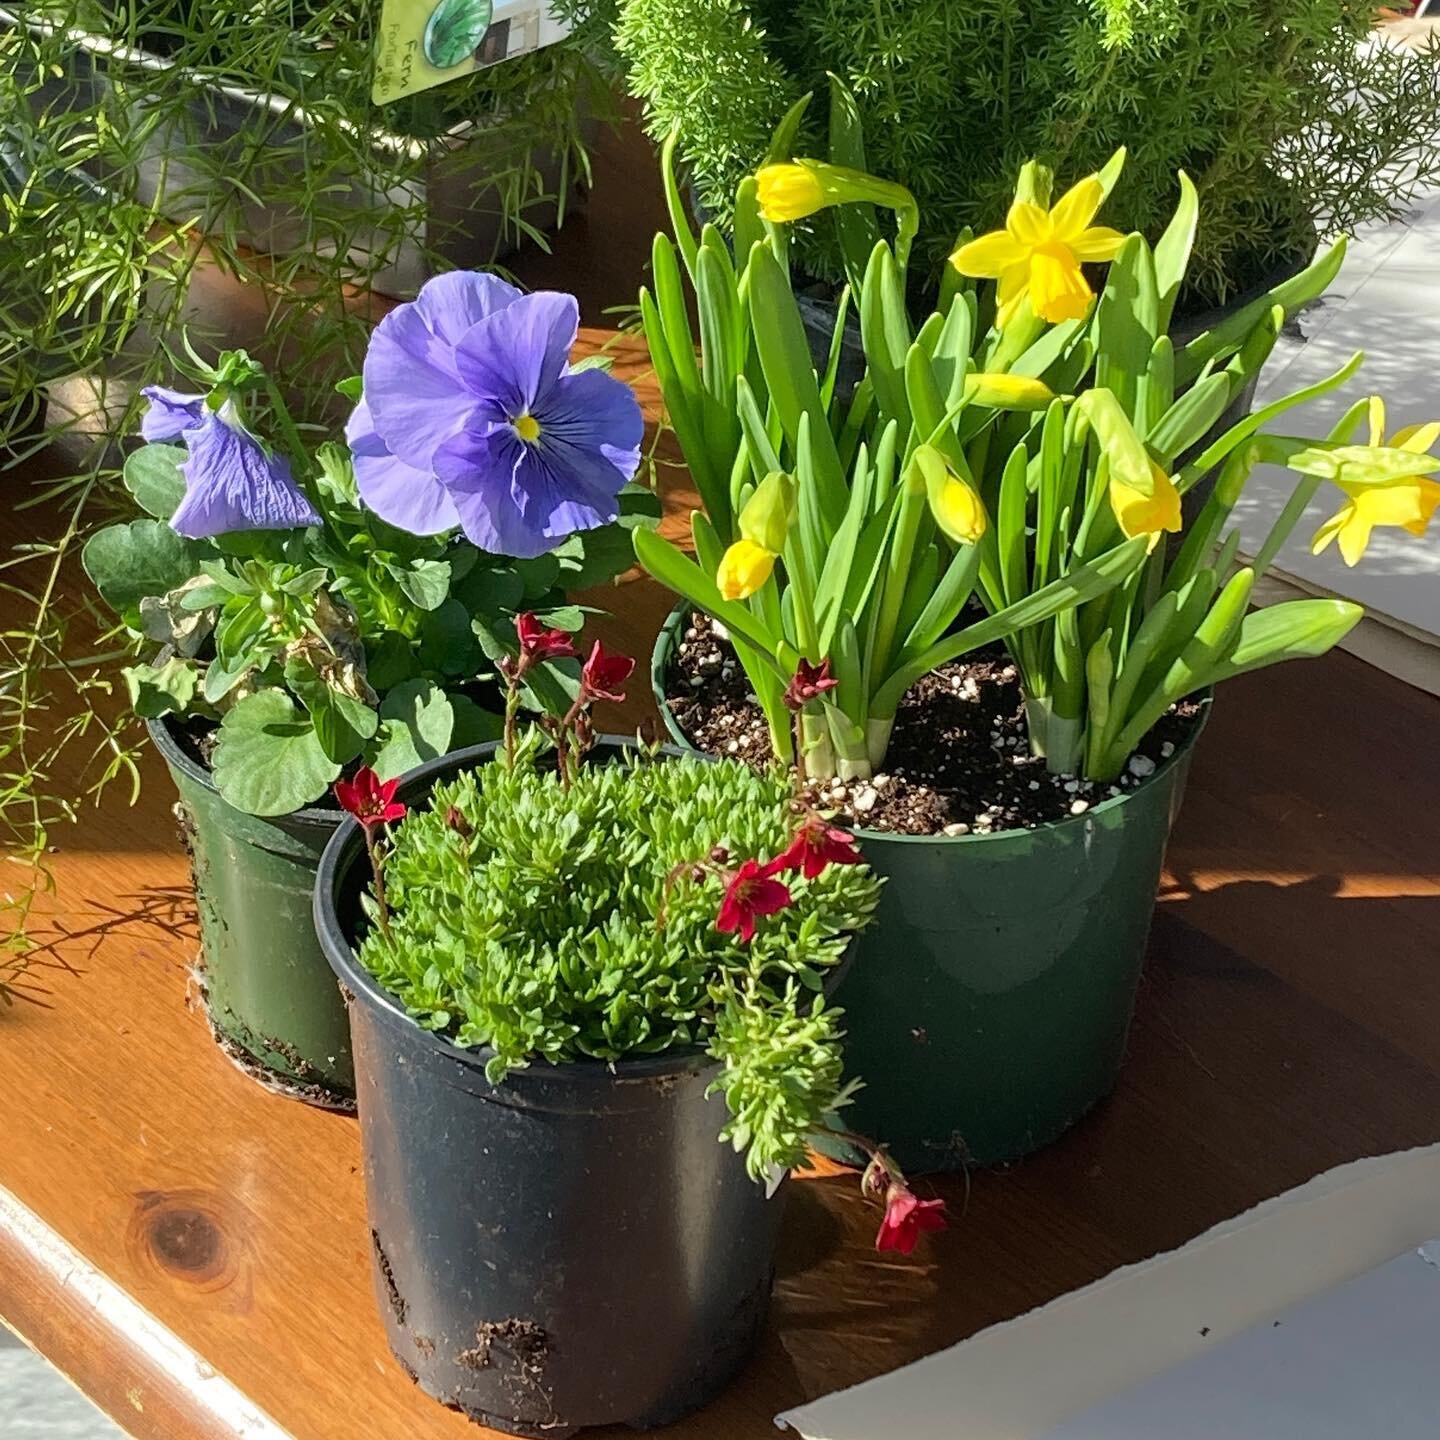 We just got a bunch of beautiful flowers! Perfect for a little host gift or something for your garden 🪴 
.
.
.
#vintage #plants #plantsofinstagram #plant #flowers #flowerstagram #gardening #garden #cutflowergarden #daffodils #spring #springflowers #